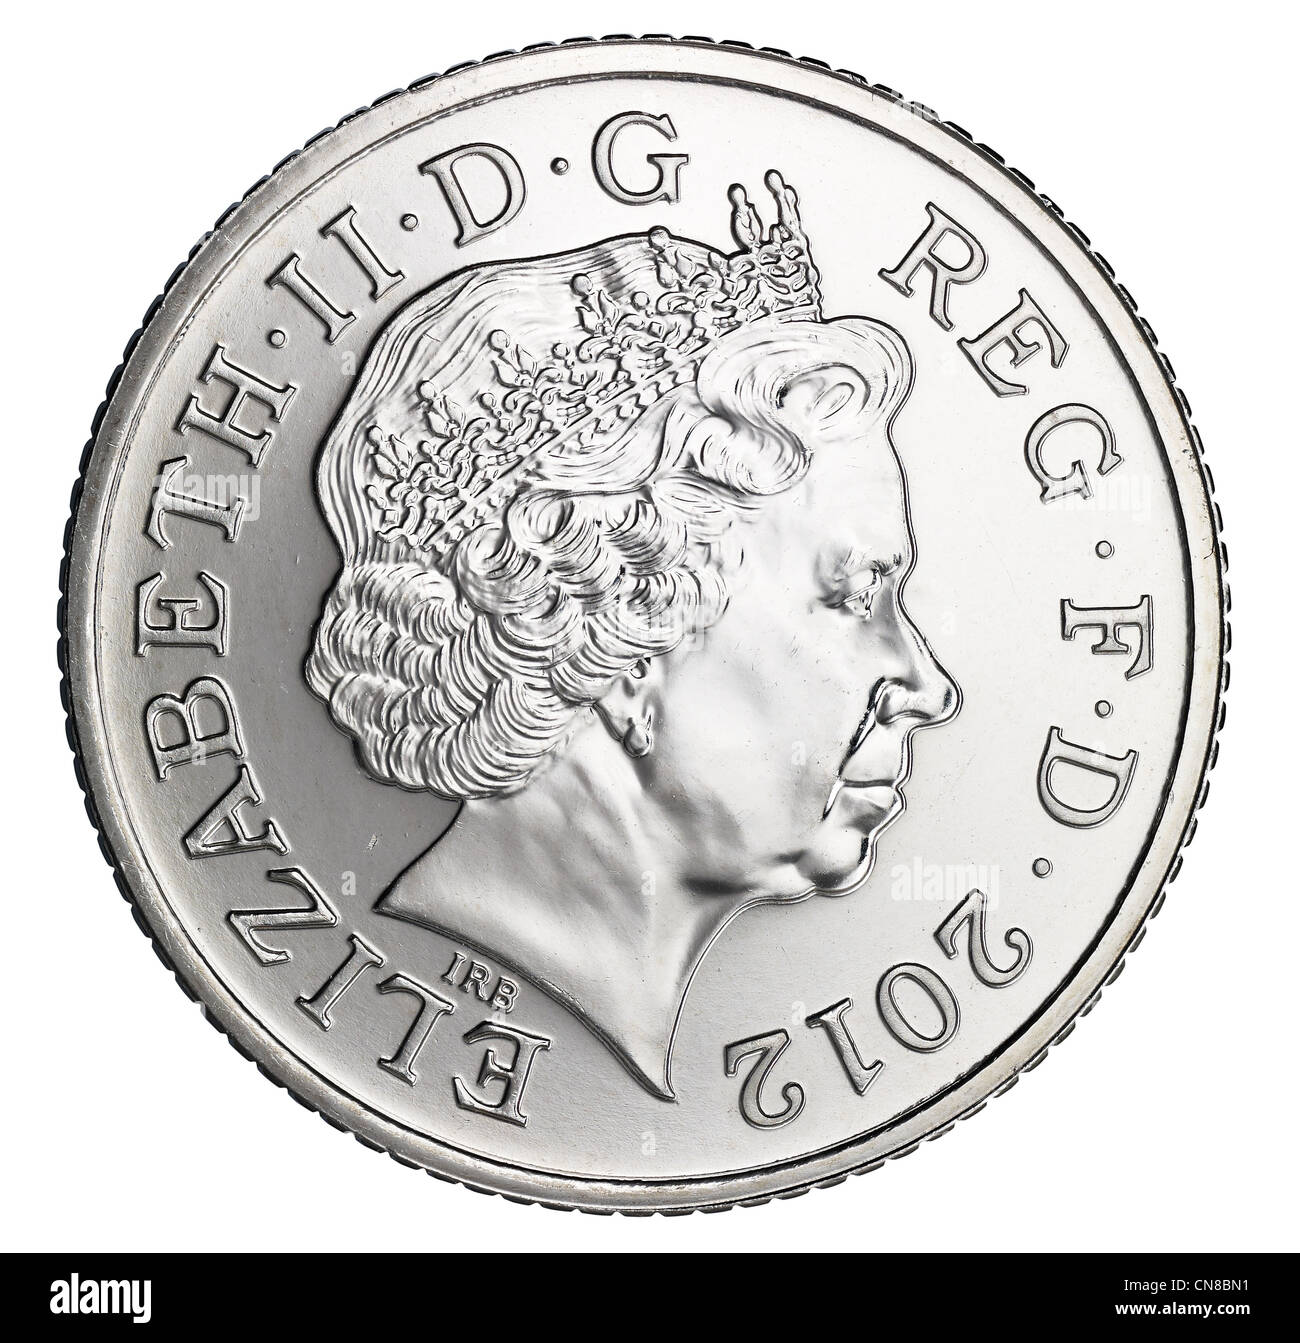 10p ten pence coin head on obverse heads 2012 Stock Photo